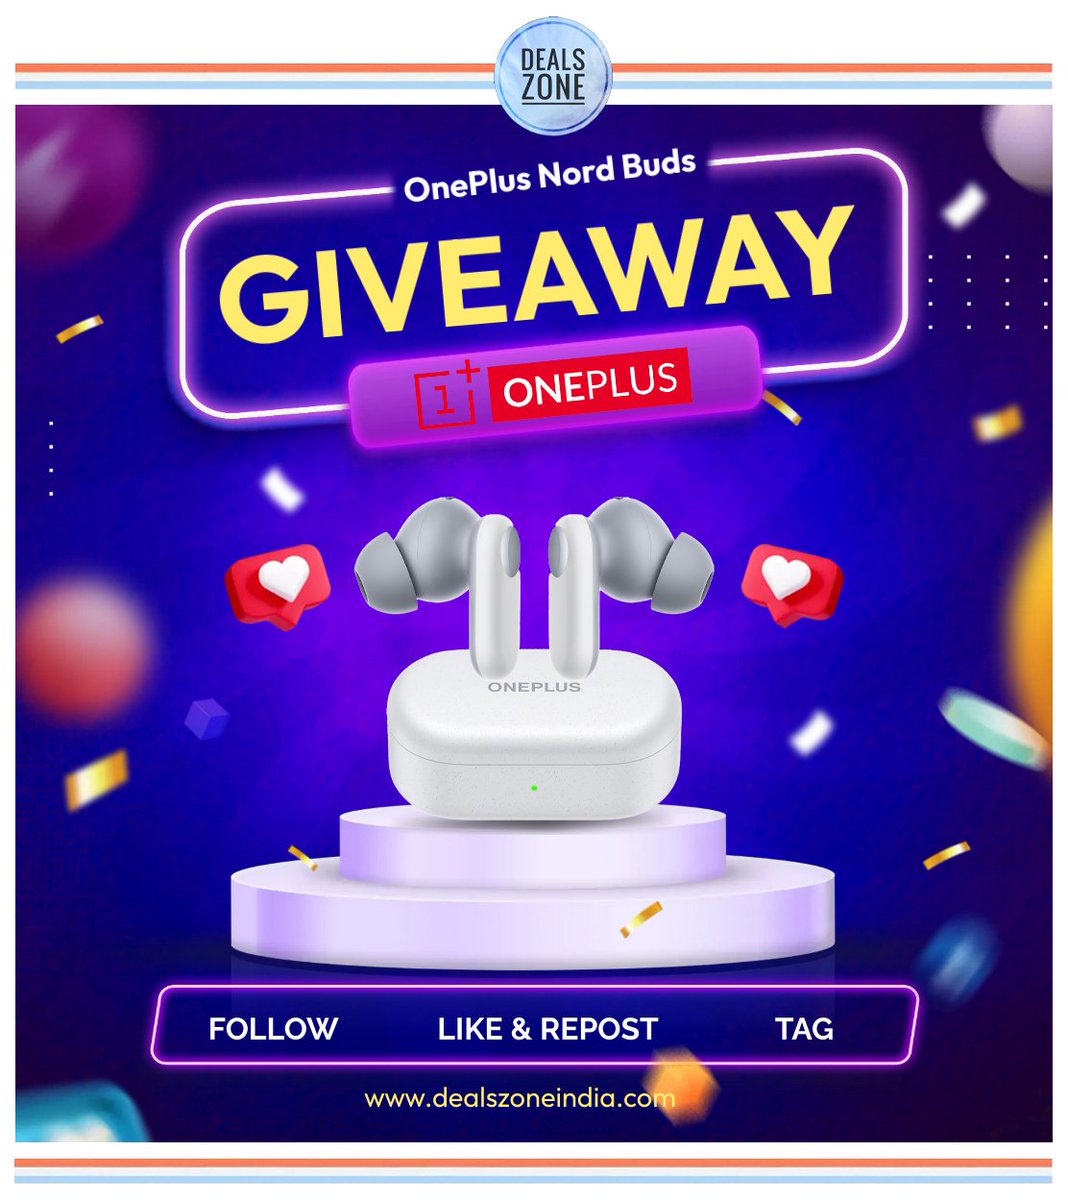 #Giveaway Alert 📢 Stand a Chance to Win Brand New #OnePlus Nord Buds. ⚡ Steps to Enter the #Contest 👇 ❤️ LIKE 🔄 REPOST ✅ FOLLOW 👉 @DealsZoneIndia Get Set Go!! #DealsZoneGiveaway